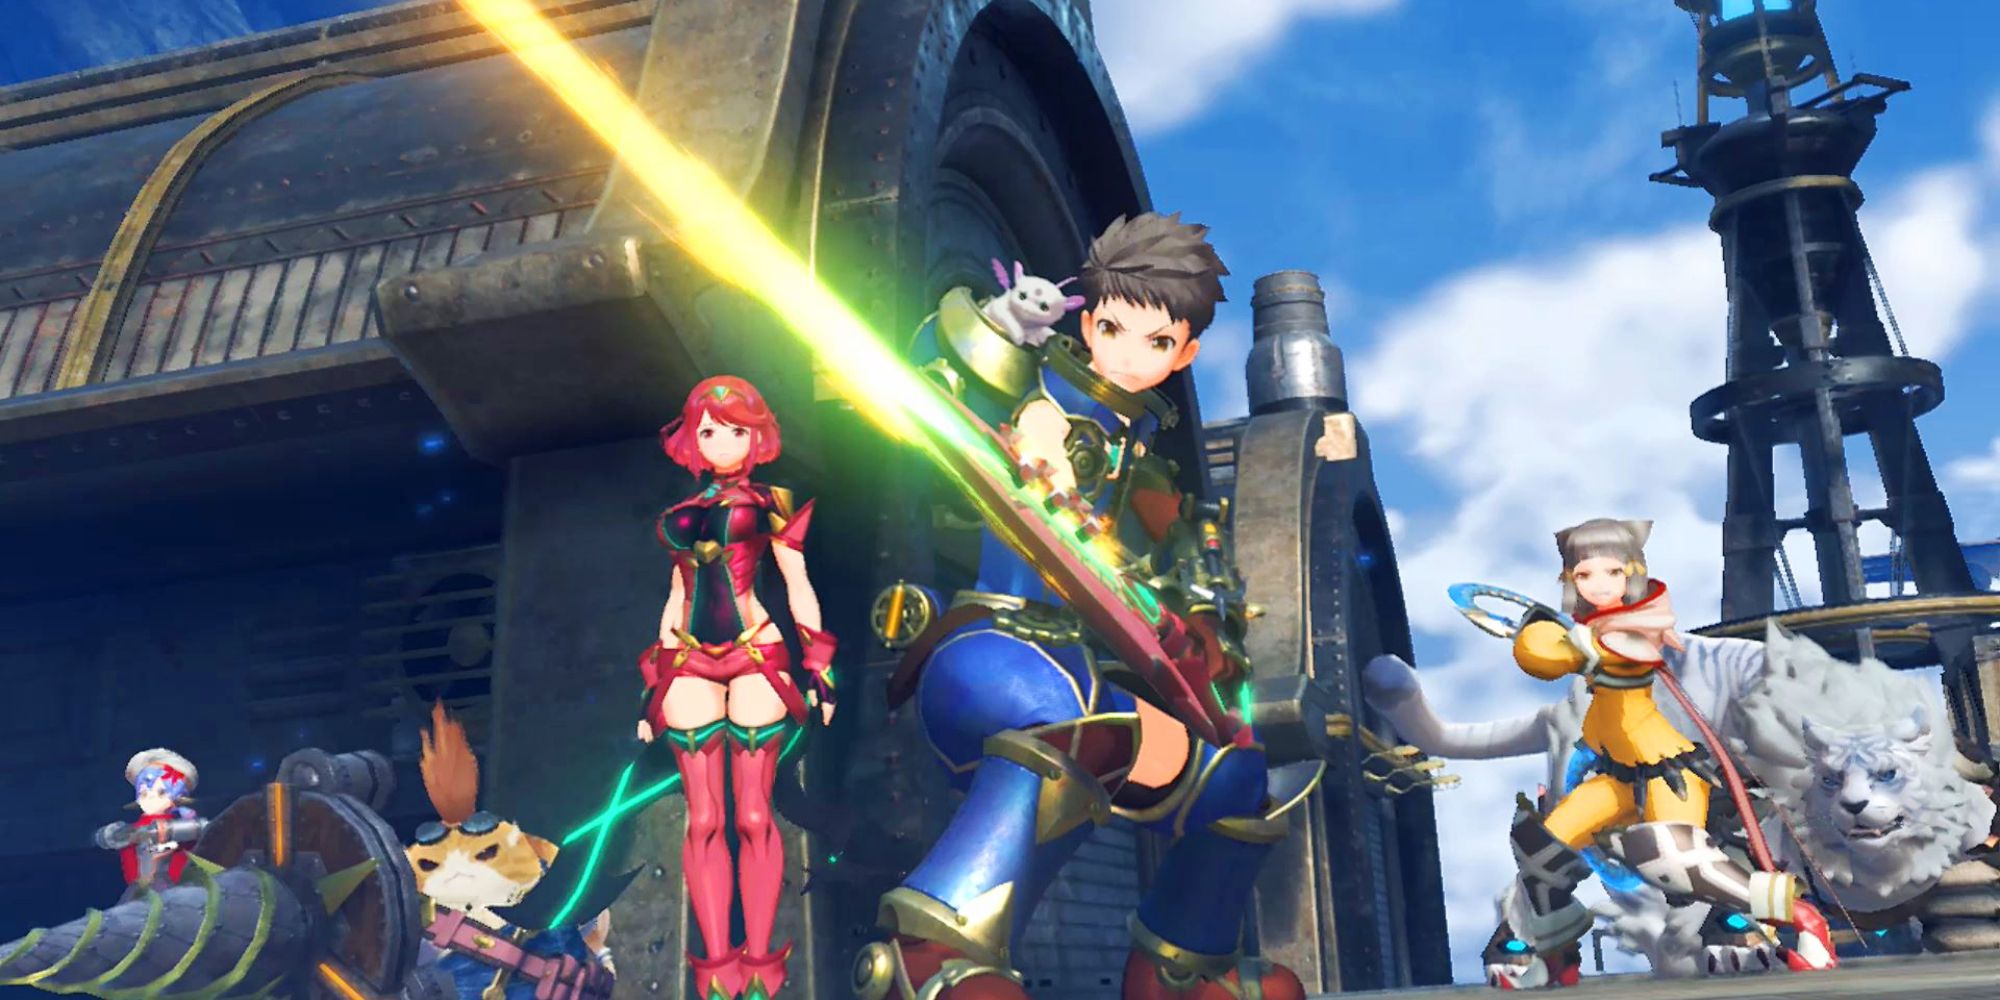 JRPG Battle Themes a wide shot from Xenoblade Chronicles 2 of Rex, Pyra, Tora, Nia, Poppi and Dromarch stood wielding their weapons in front of a building